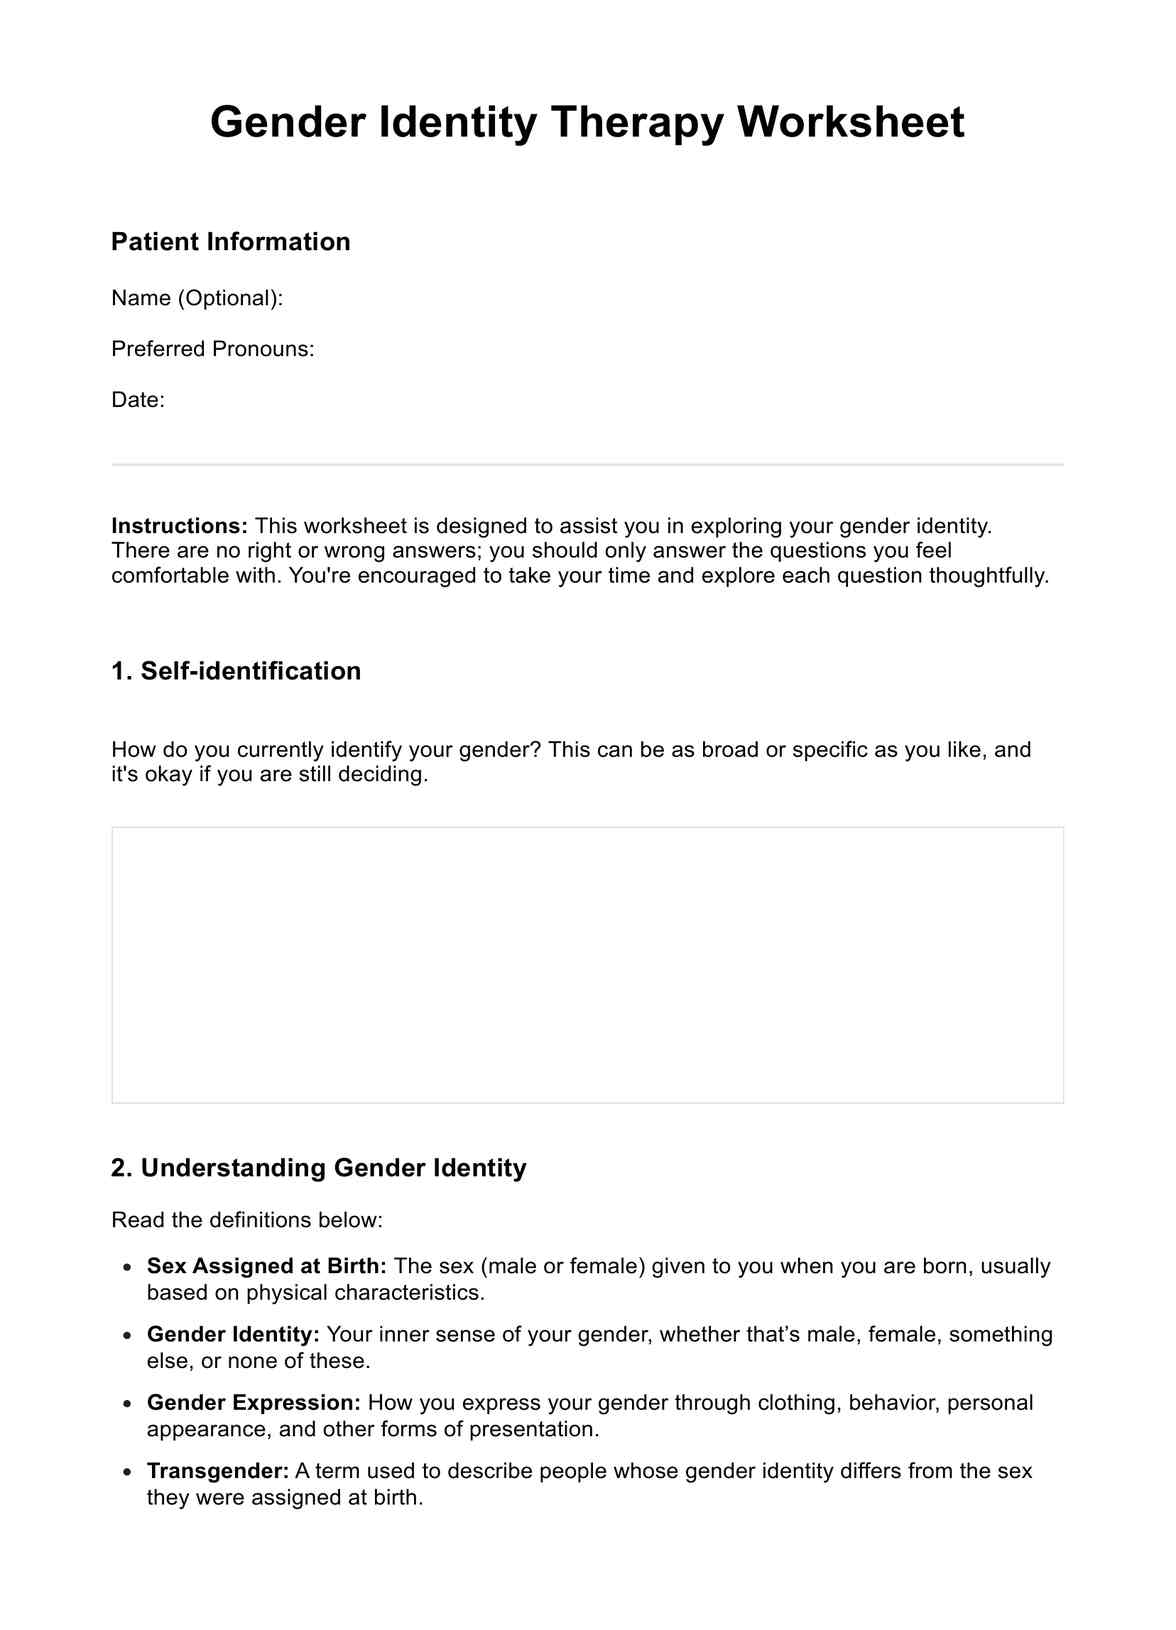 Gender Identity Therapy Worksheet PDF Example